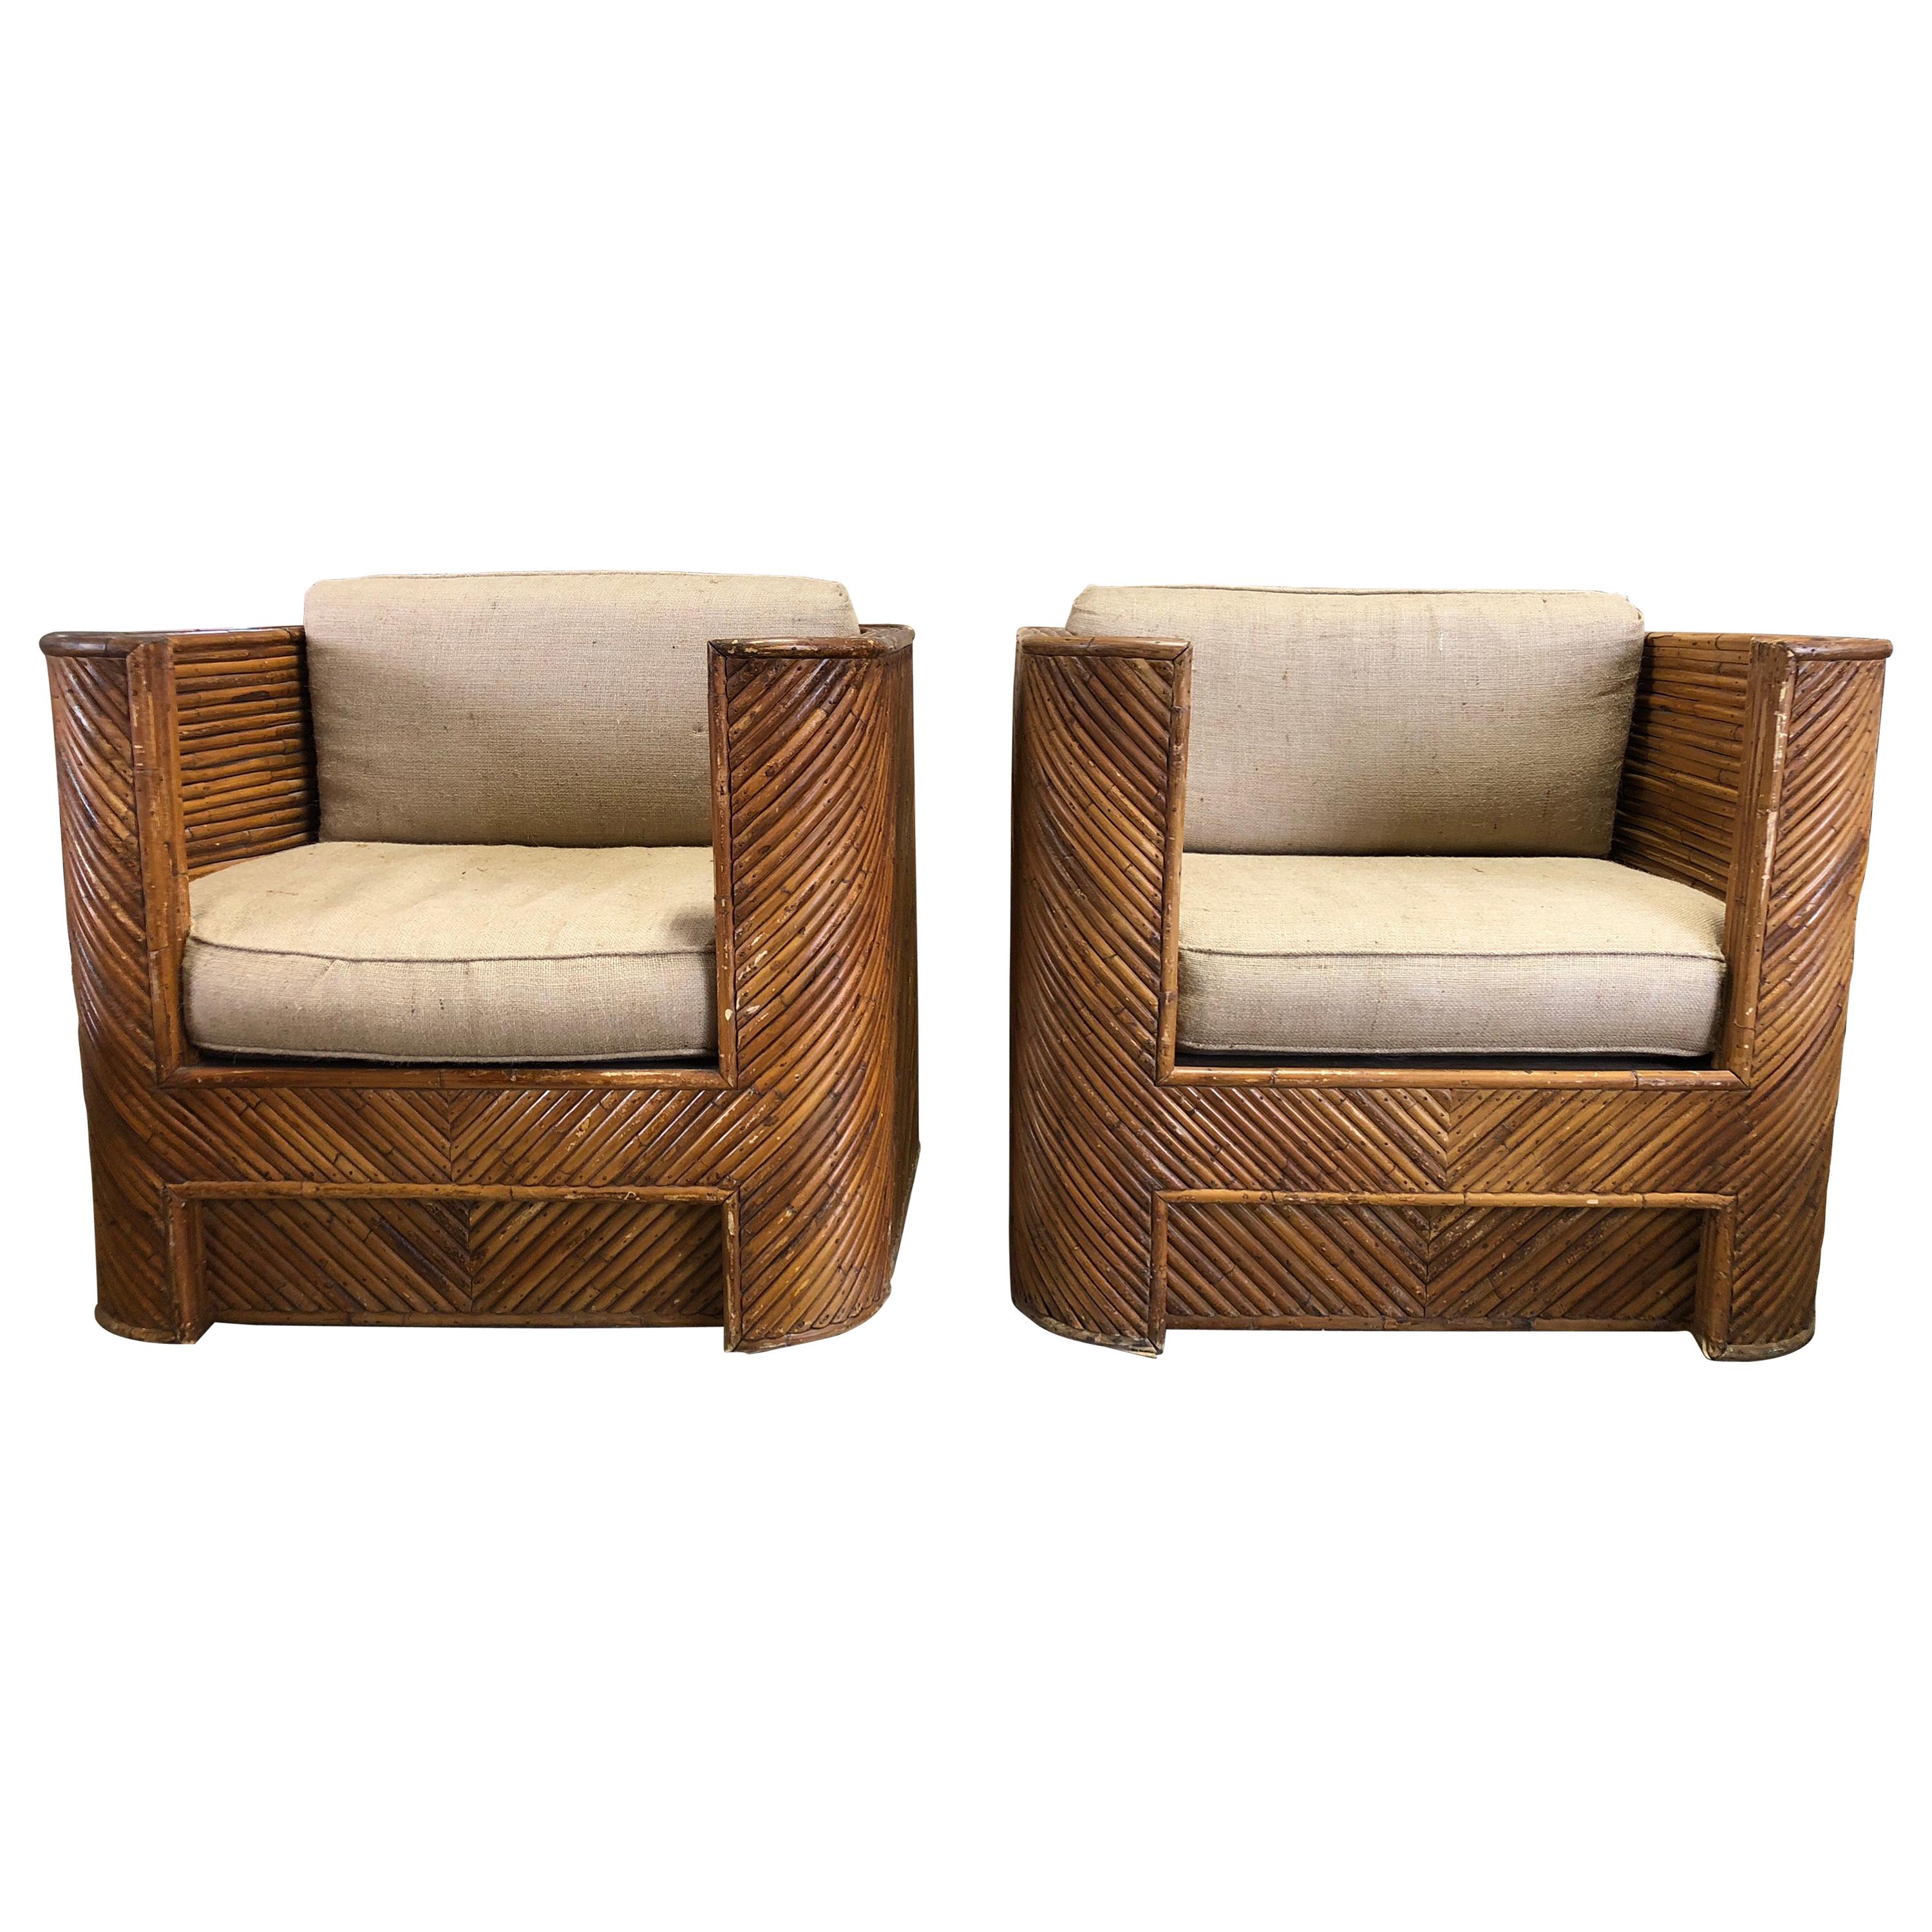 Midcentury Gabriella Crespi Style Italian Bamboo Club Chairs For Sale